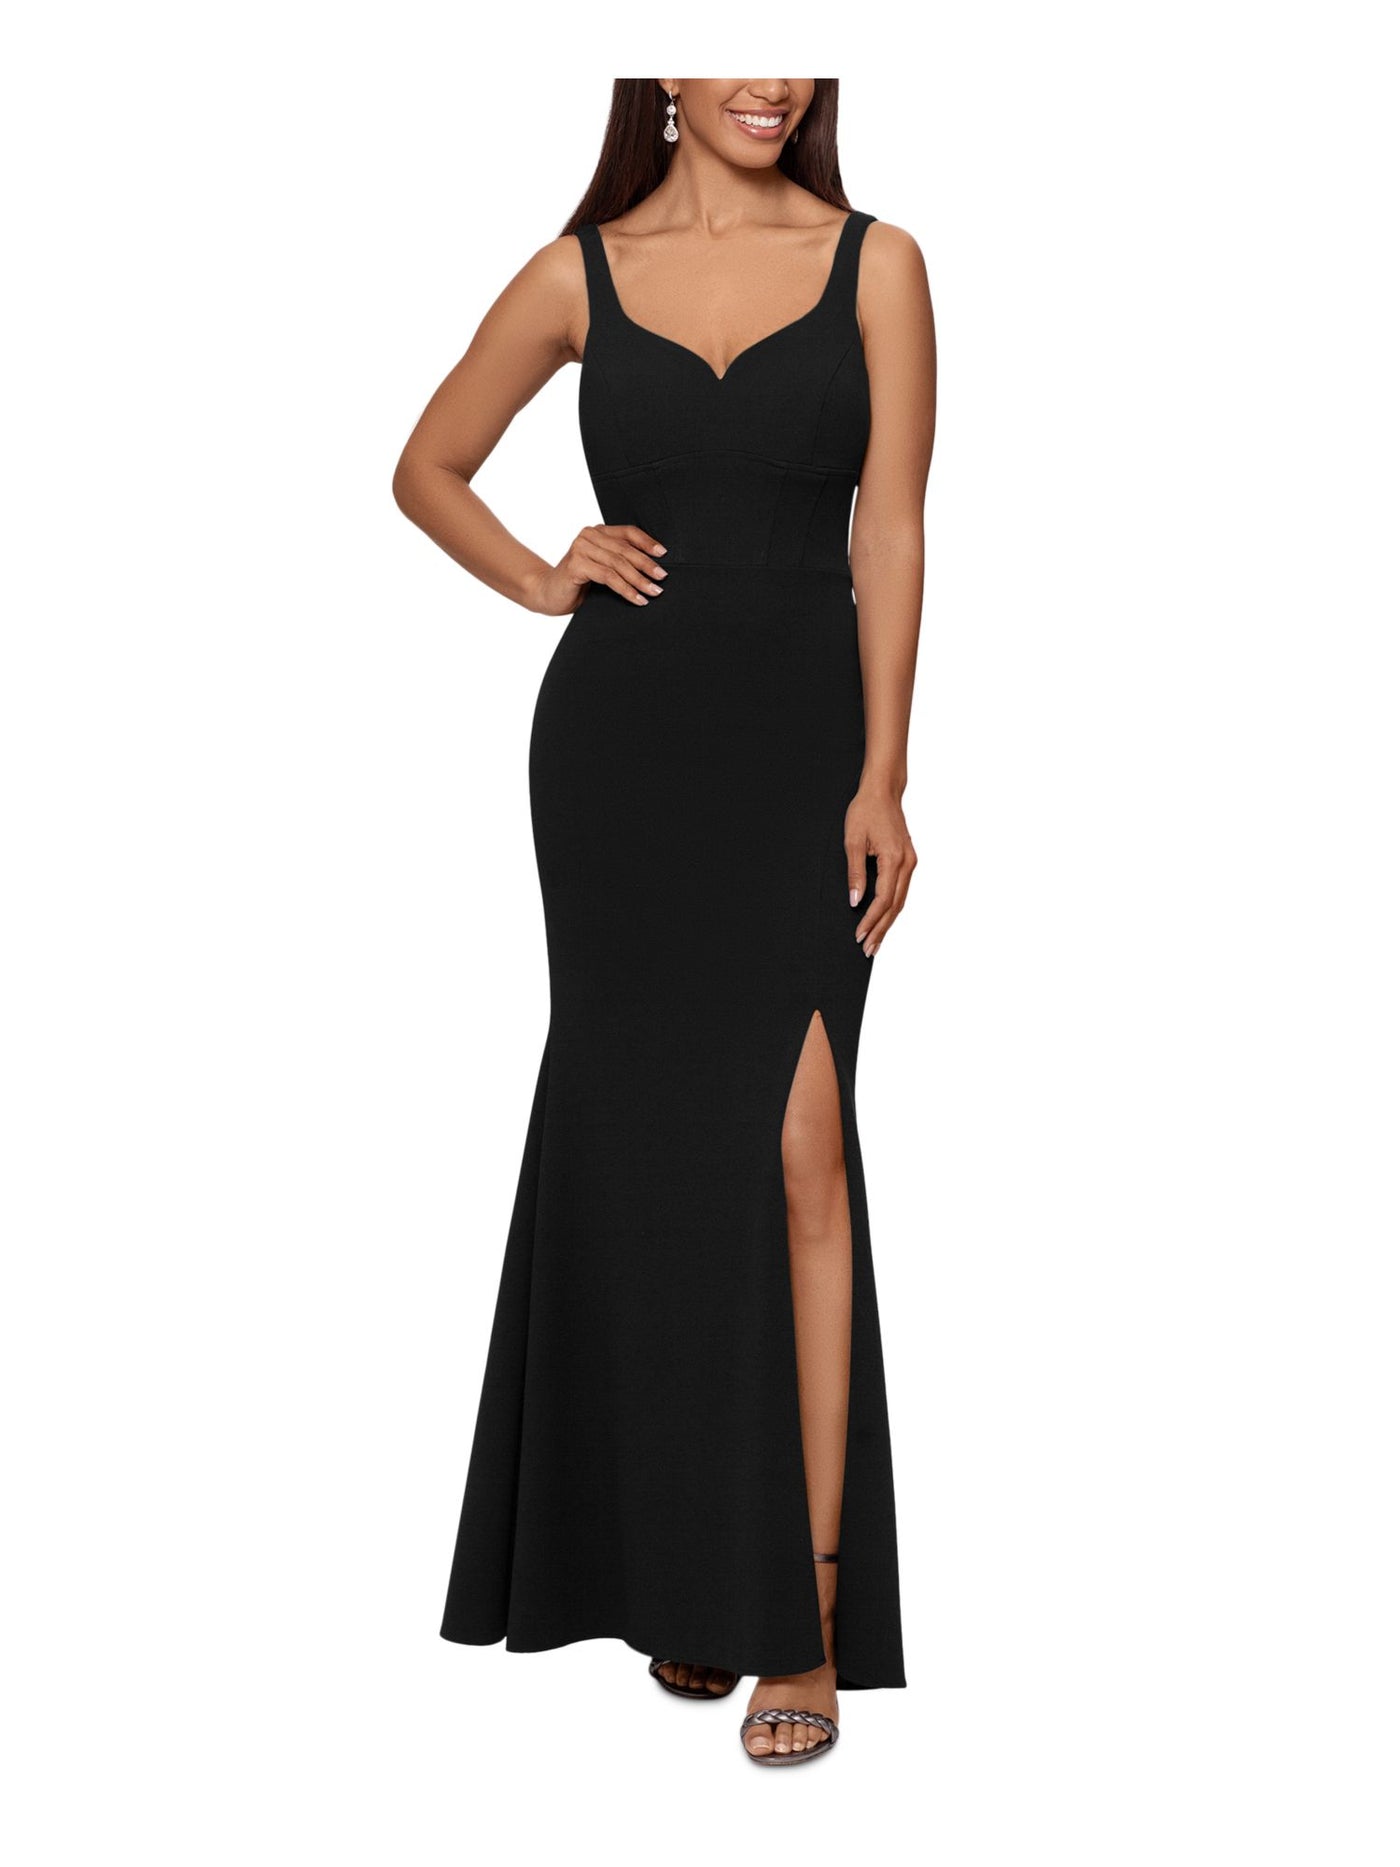 XSCAPE Womens Black Stretch Zippered Slitted Lined Adjustable Straps Sleeveless Sweetheart Neckline Full-Length Formal Gown Dress 4